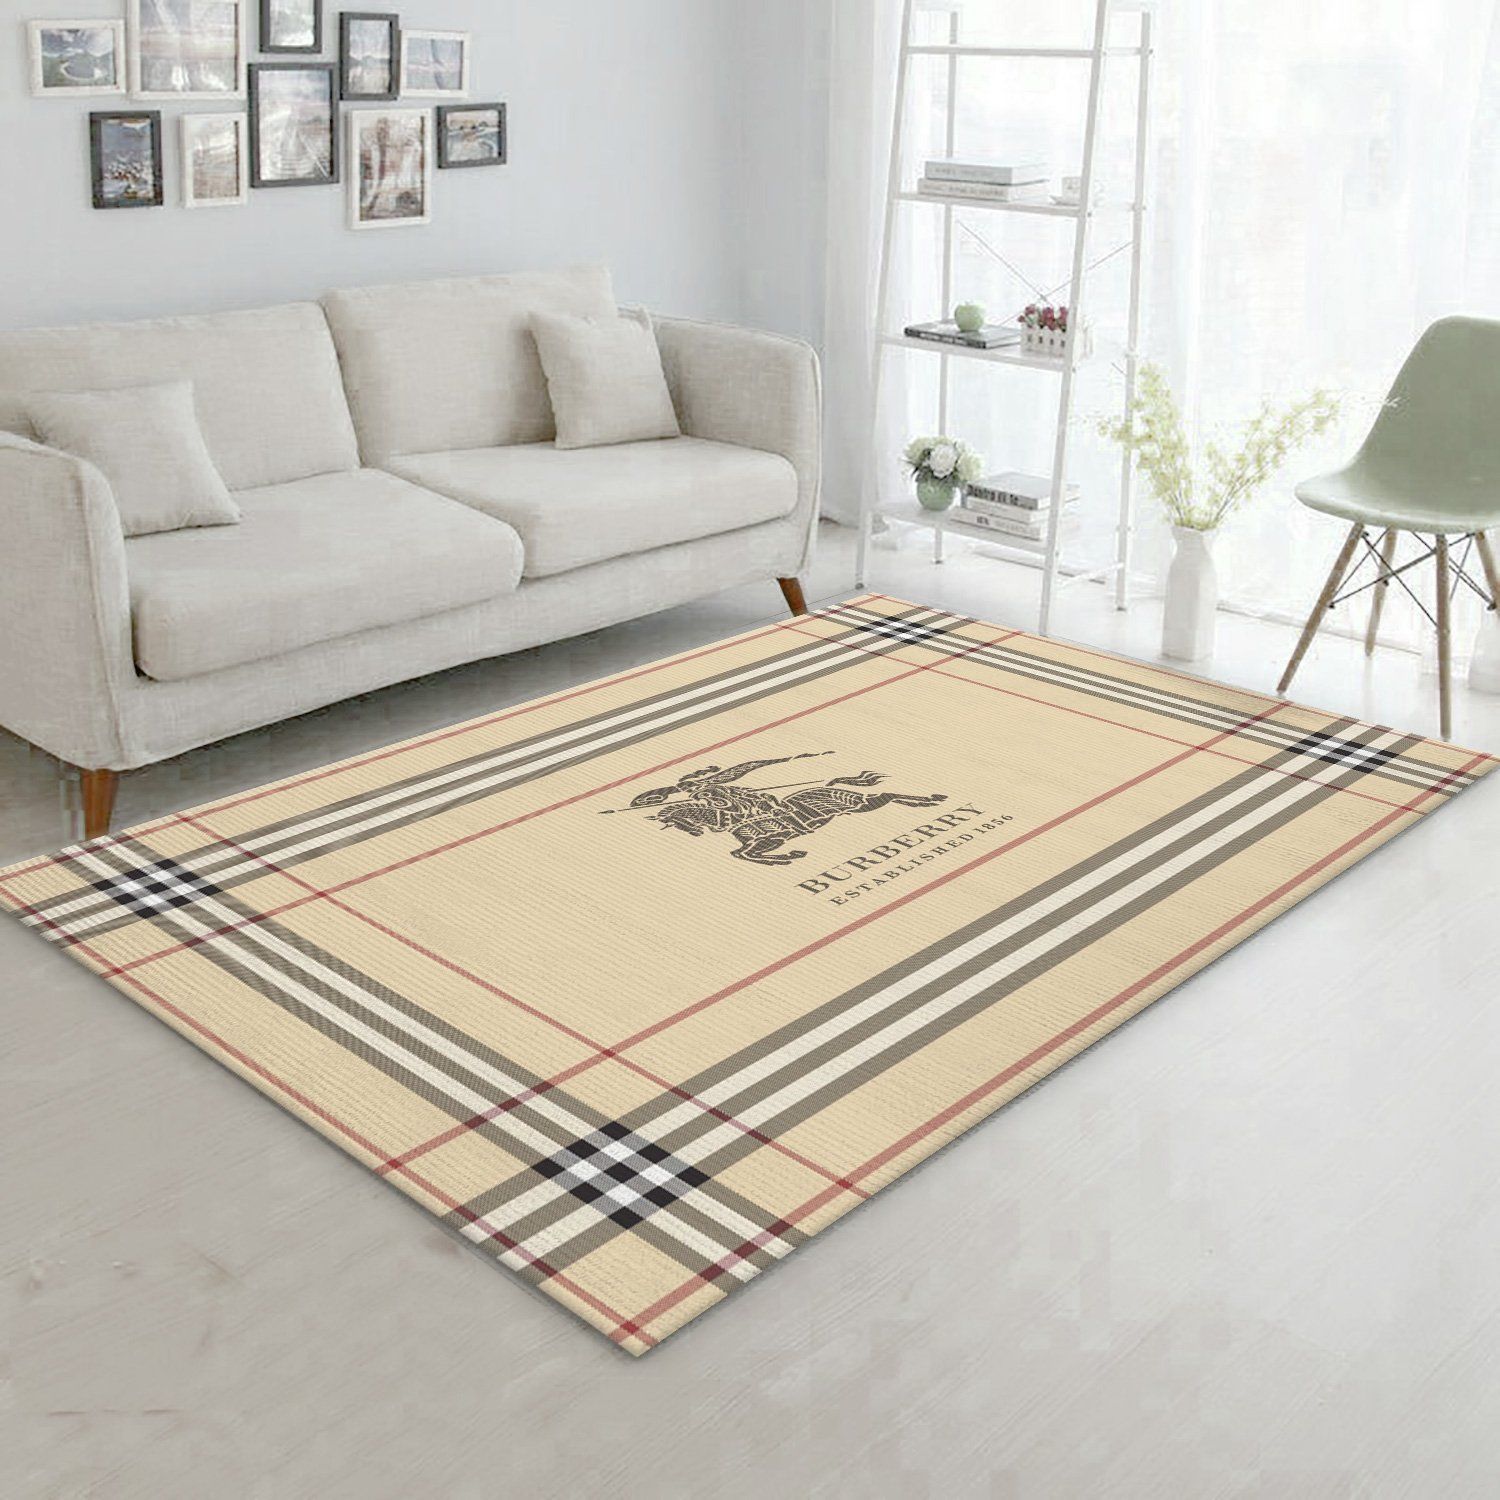 Burberry Ver2 Area Rug For Christmas Bedroom Rug Home US Decor - Indoor Outdoor Rugs 2